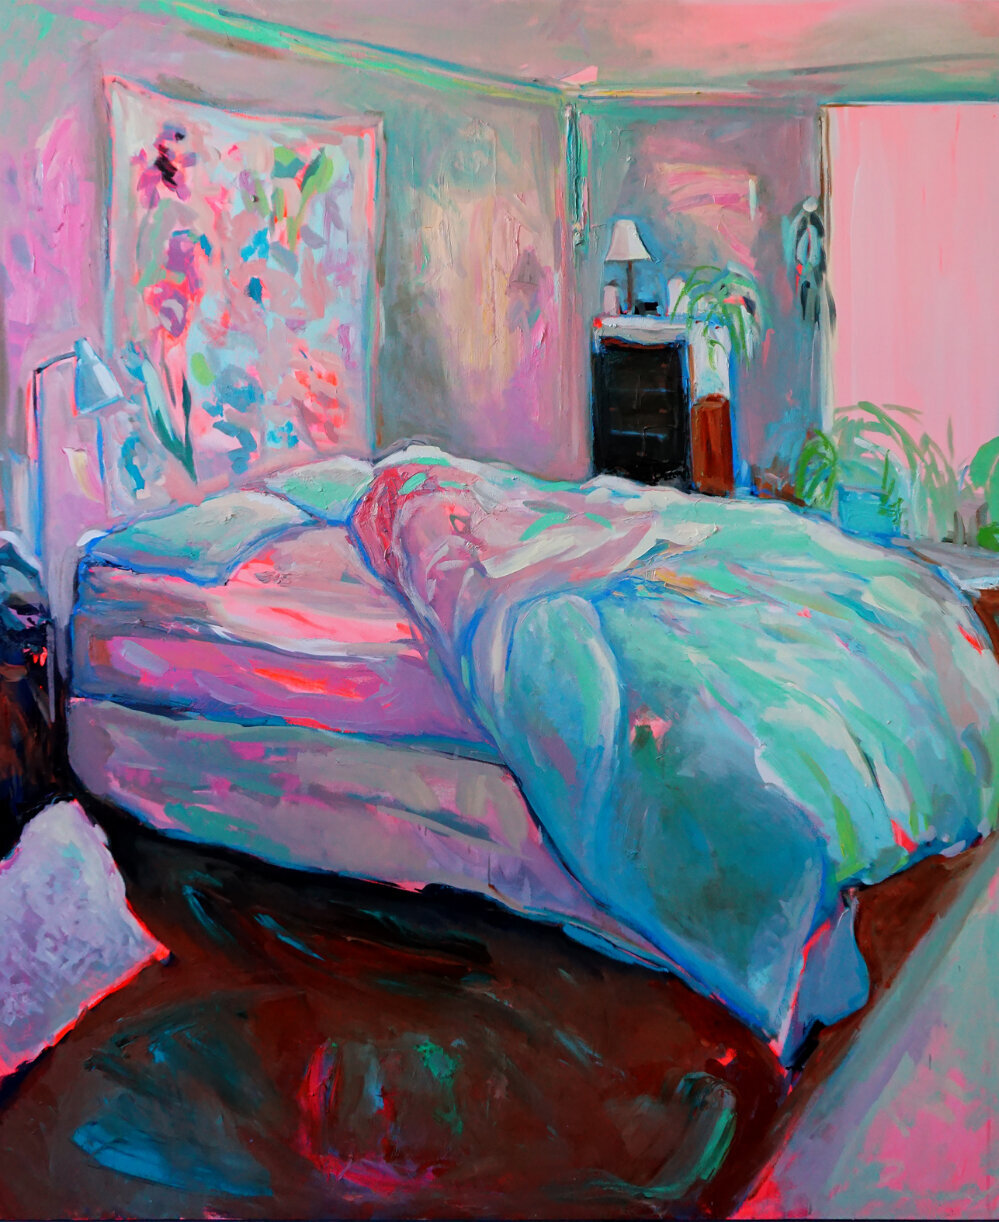 EP_RestingPlace_6x5ft_oil on canvas_2019